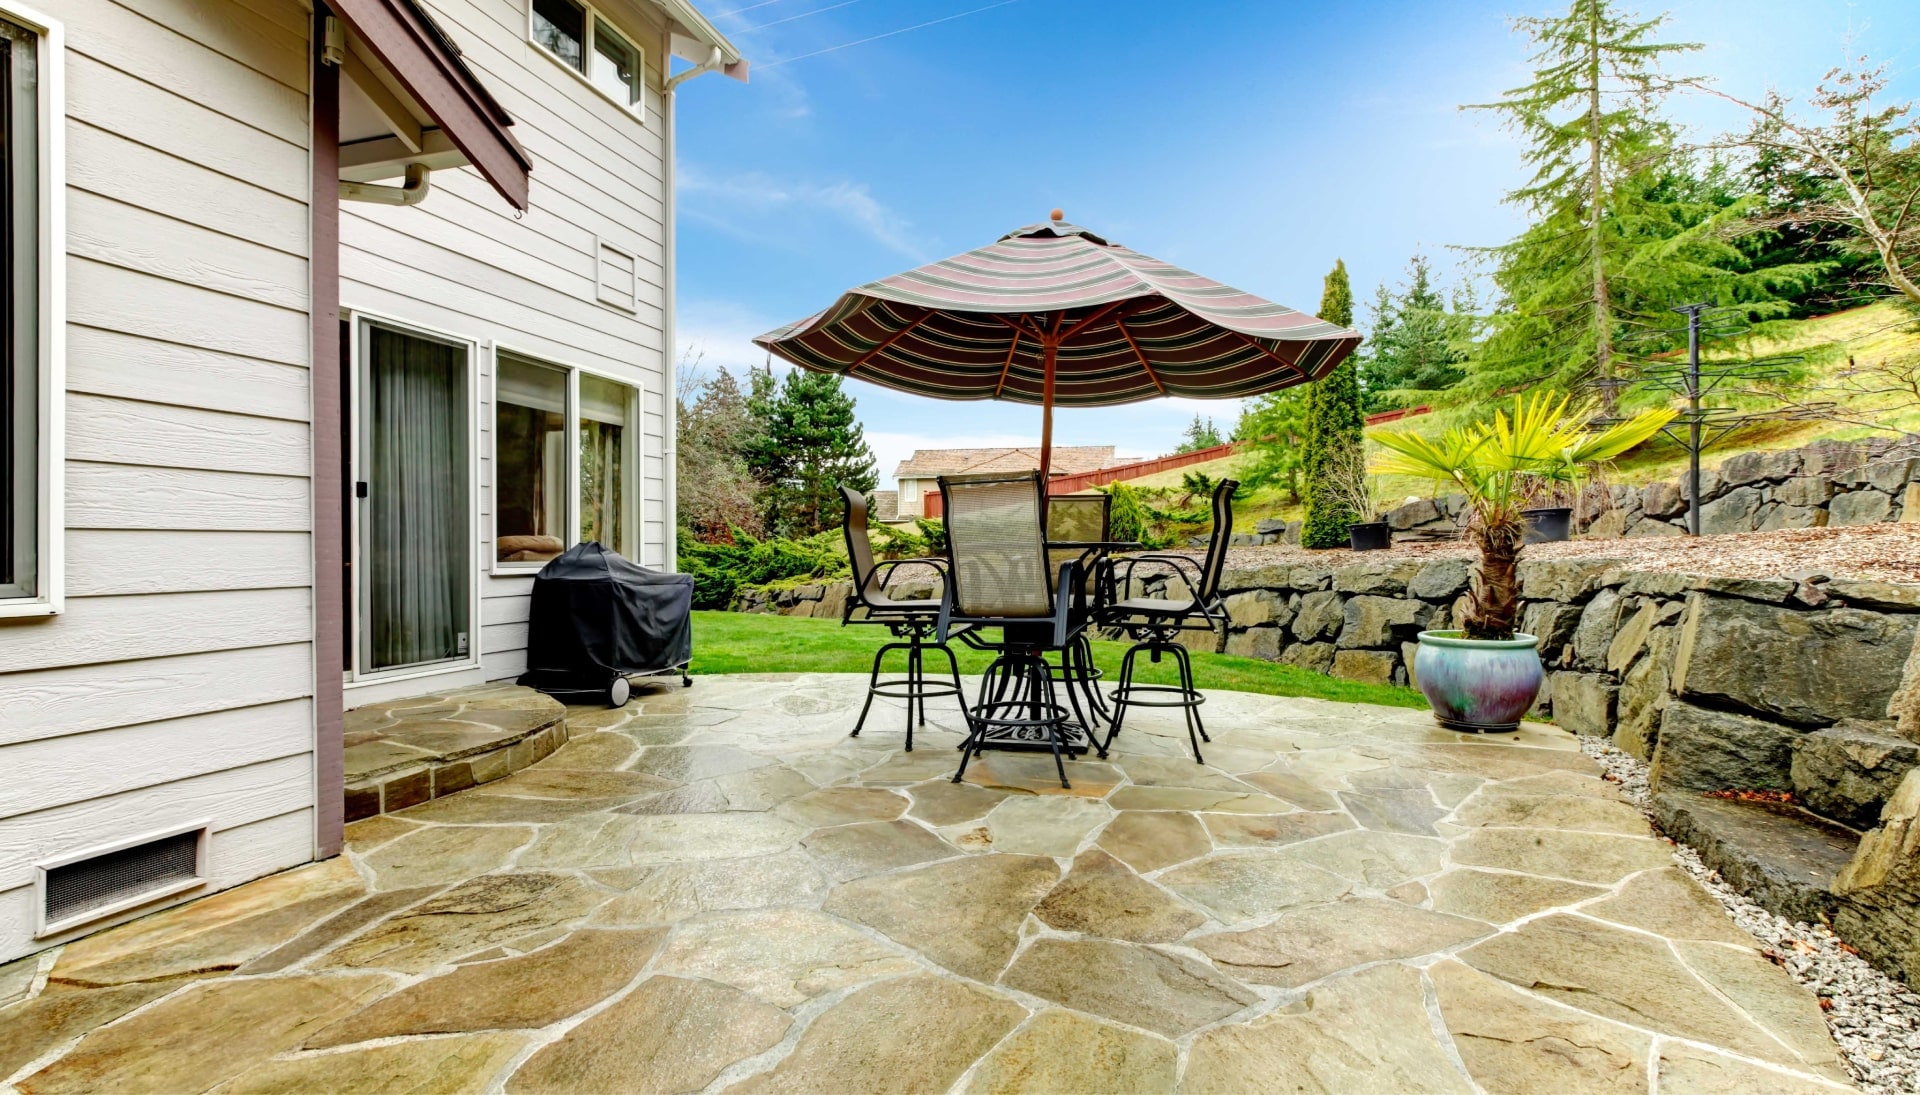 Create an Outdoor Oasis with Stunning Concrete Patio in Lima, OH - Enjoy Beautifully Textured and Patterned Concrete Surfaces for Your Entertaining and Relaxation Needs.